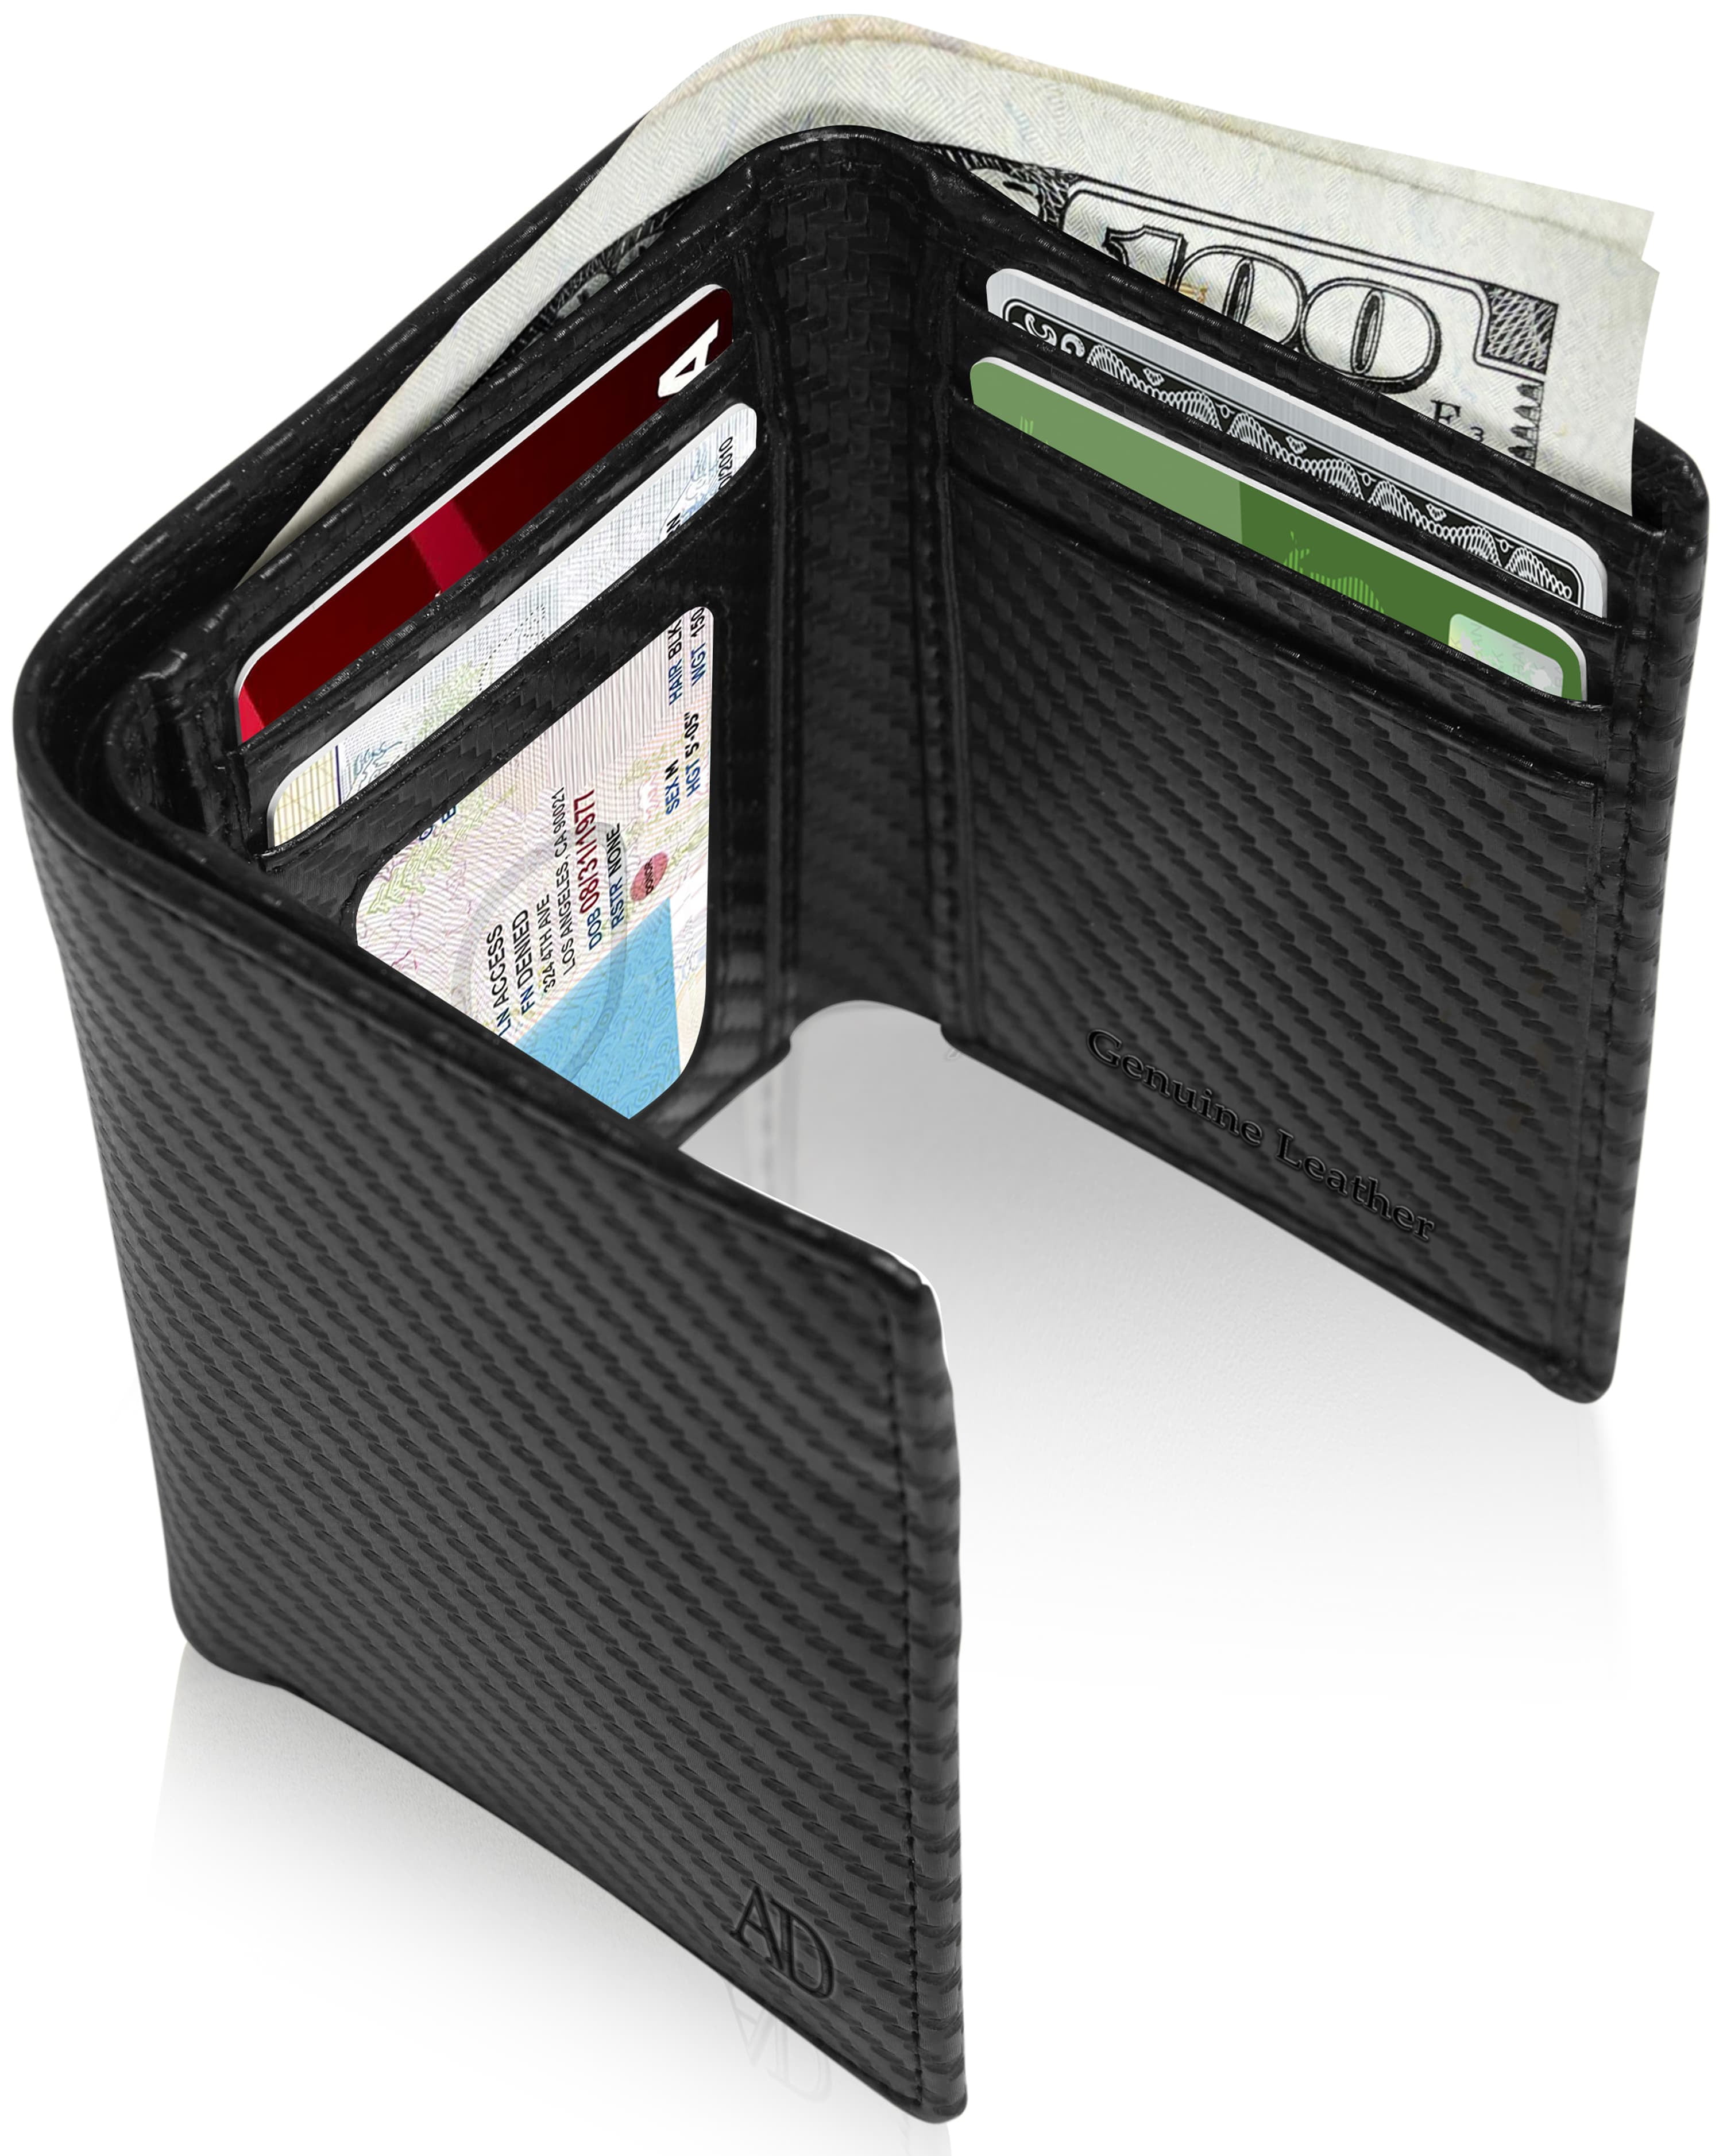 Mens Wallet -Minimalist Leather Wallets,Best Gift for your son on  Birthday,Christmas Day. (1 PIECE) 